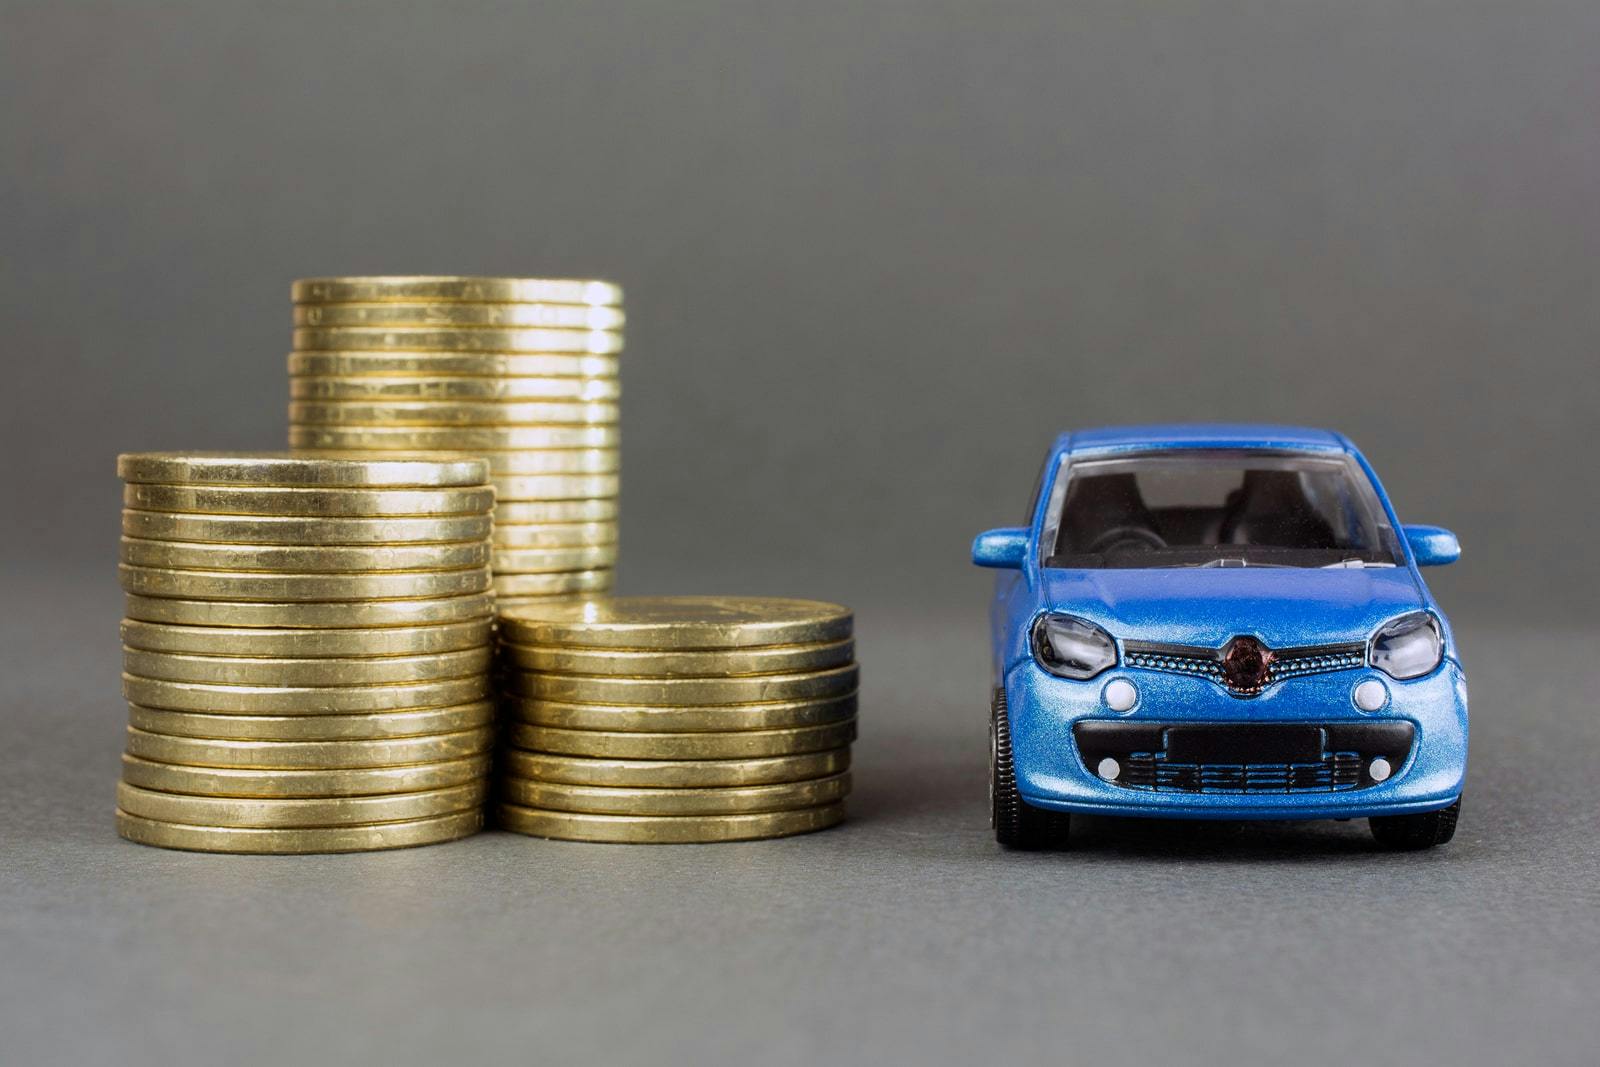 blue toy car next to piles of money, showing drivers' desire to save money due to cost of living